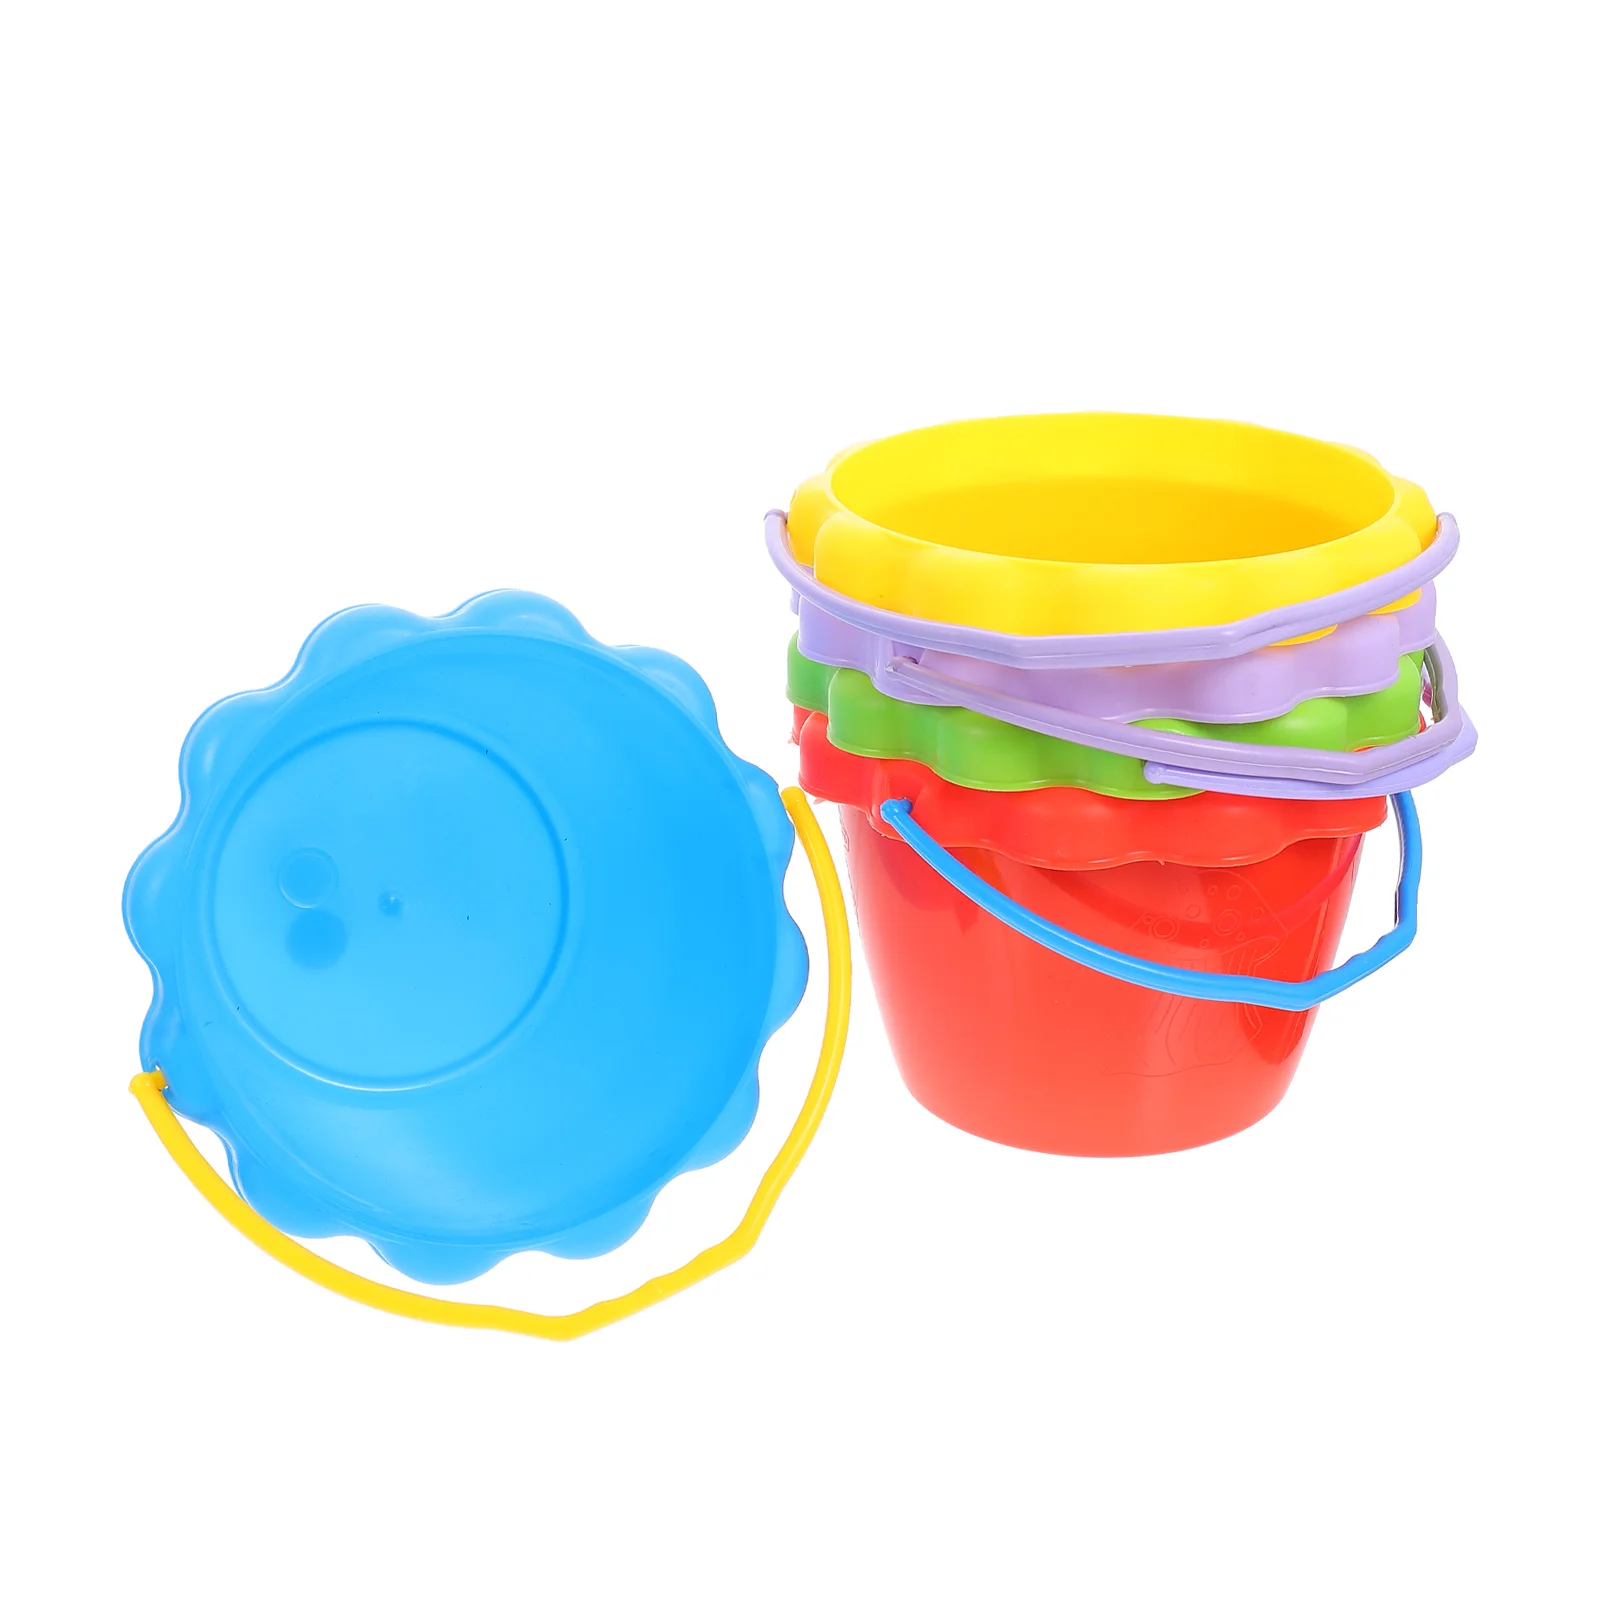 

5 Pcs Toy Beach Bucket Plastic Sand Holders Children Outdoor Toys Baby Summer Frame Kindergarten Playing Tools Pool Party Kids